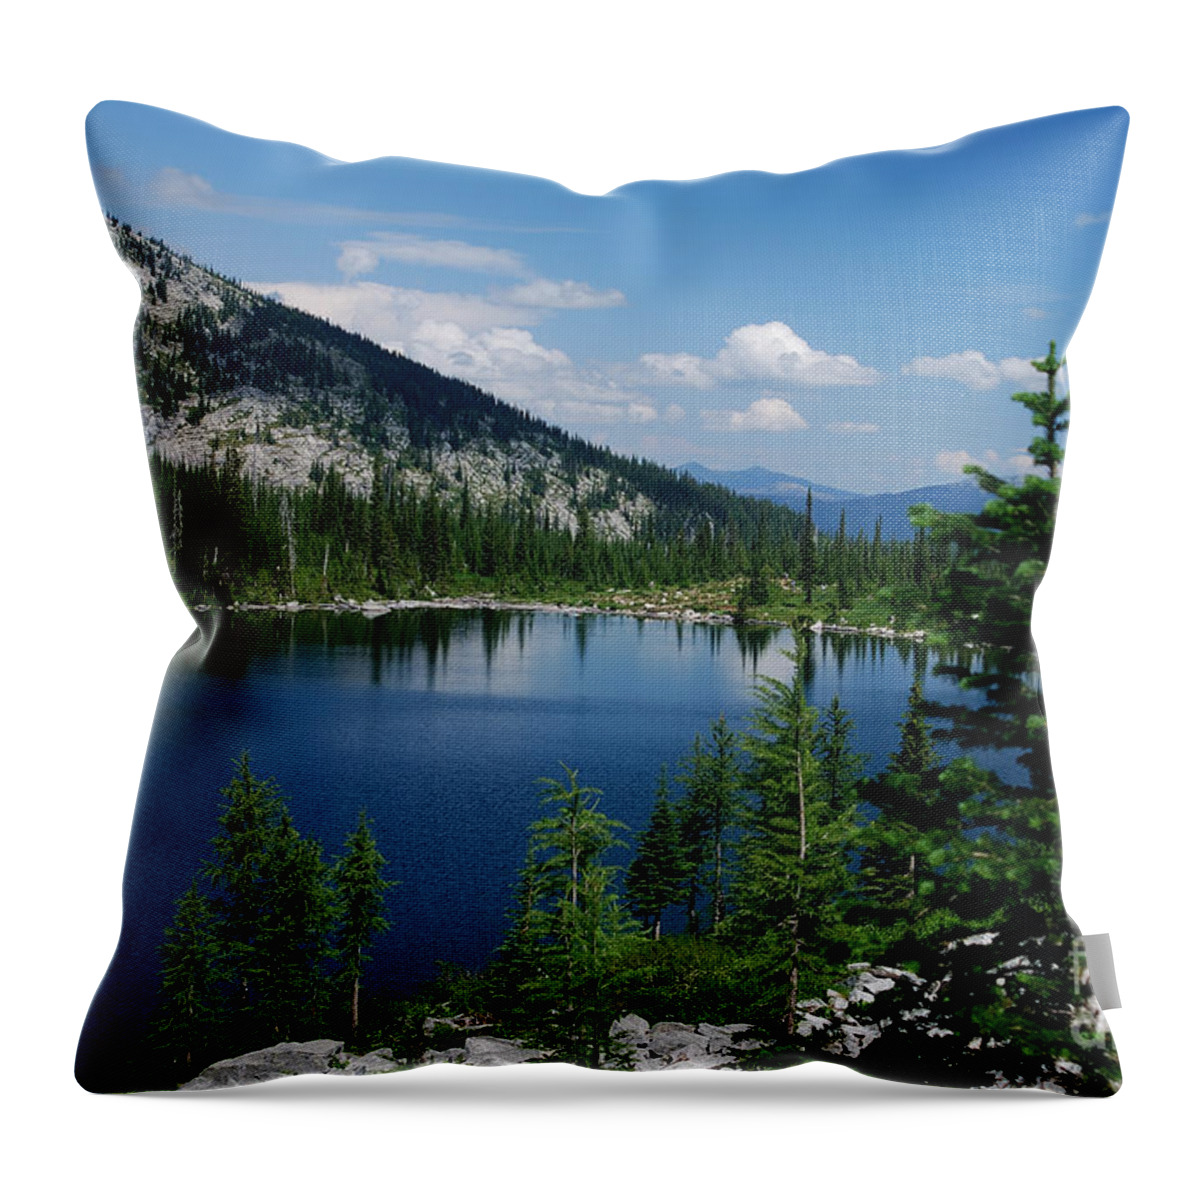 Idaho Throw Pillow featuring the photograph View At Roman Nose Peak by Sharon Elliott